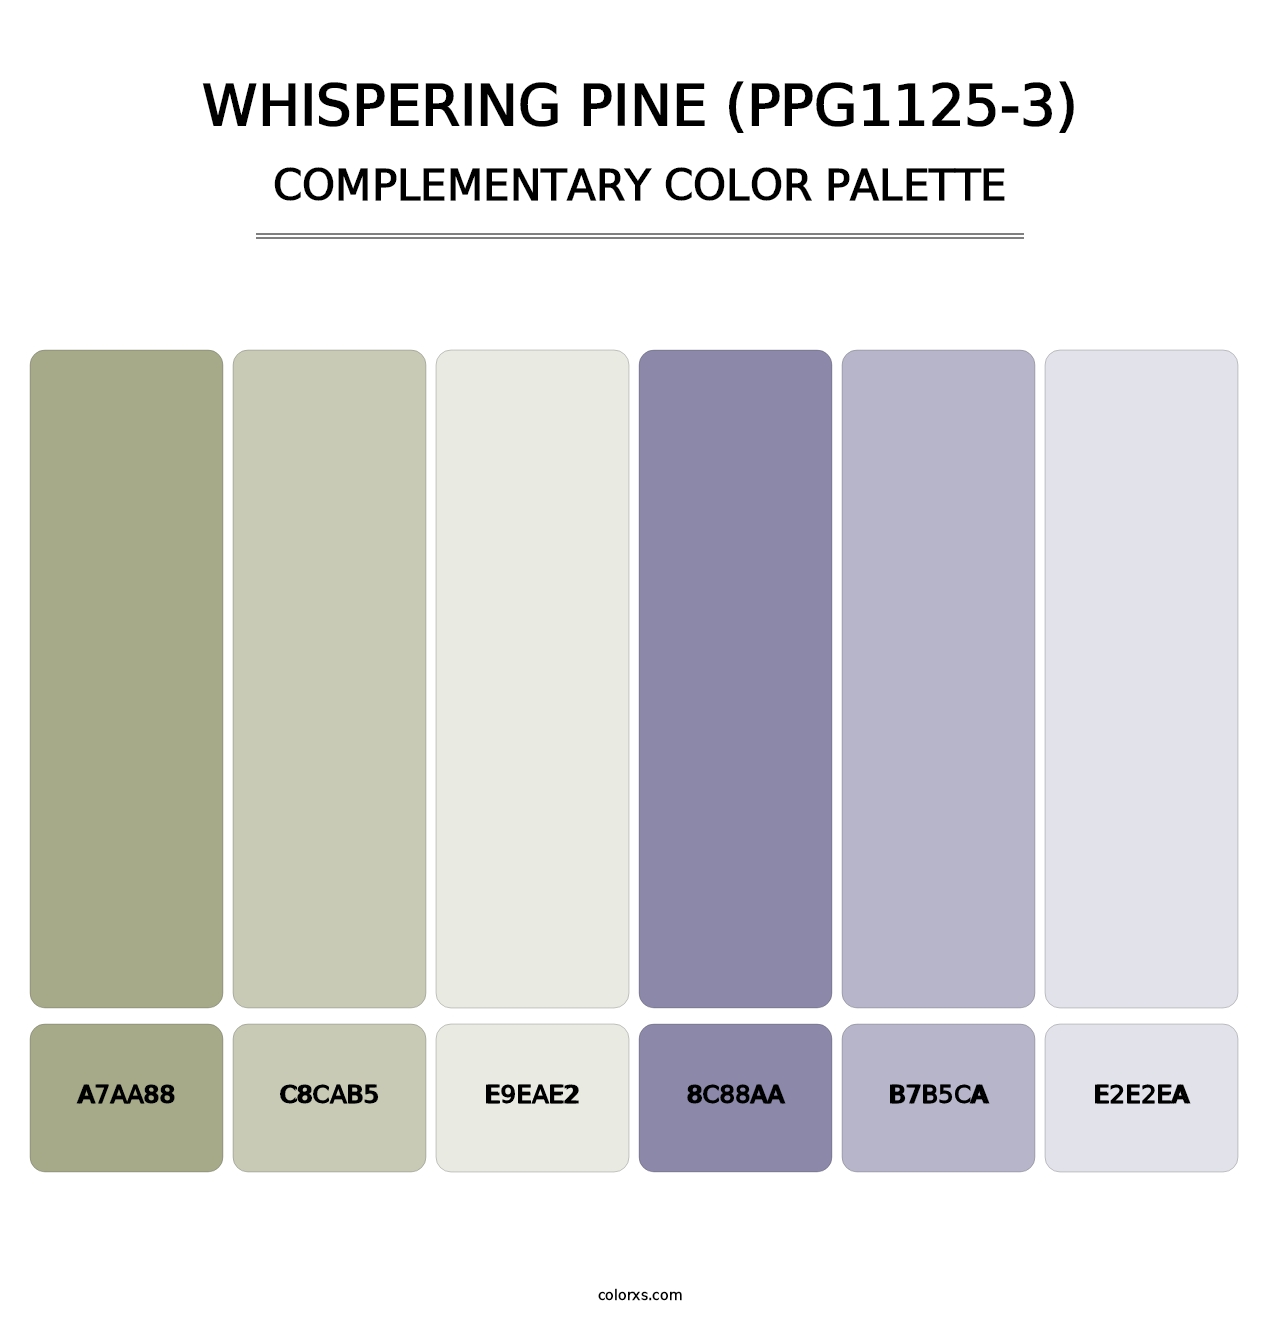 Whispering Pine (PPG1125-3) - Complementary Color Palette